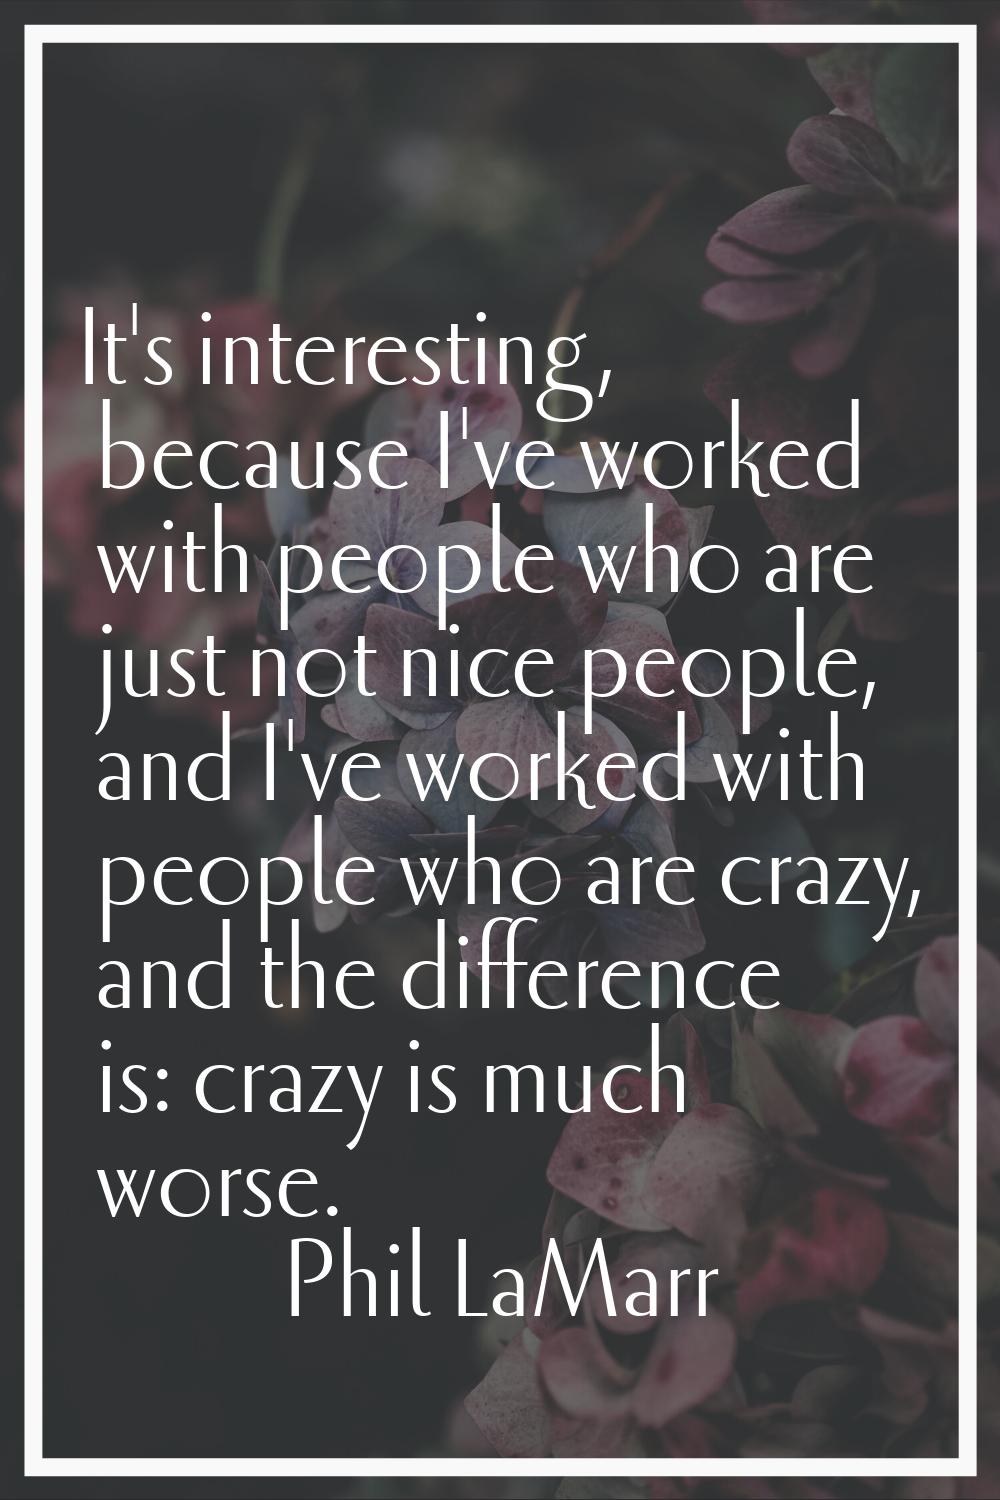 It's interesting, because I've worked with people who are just not nice people, and I've worked wit